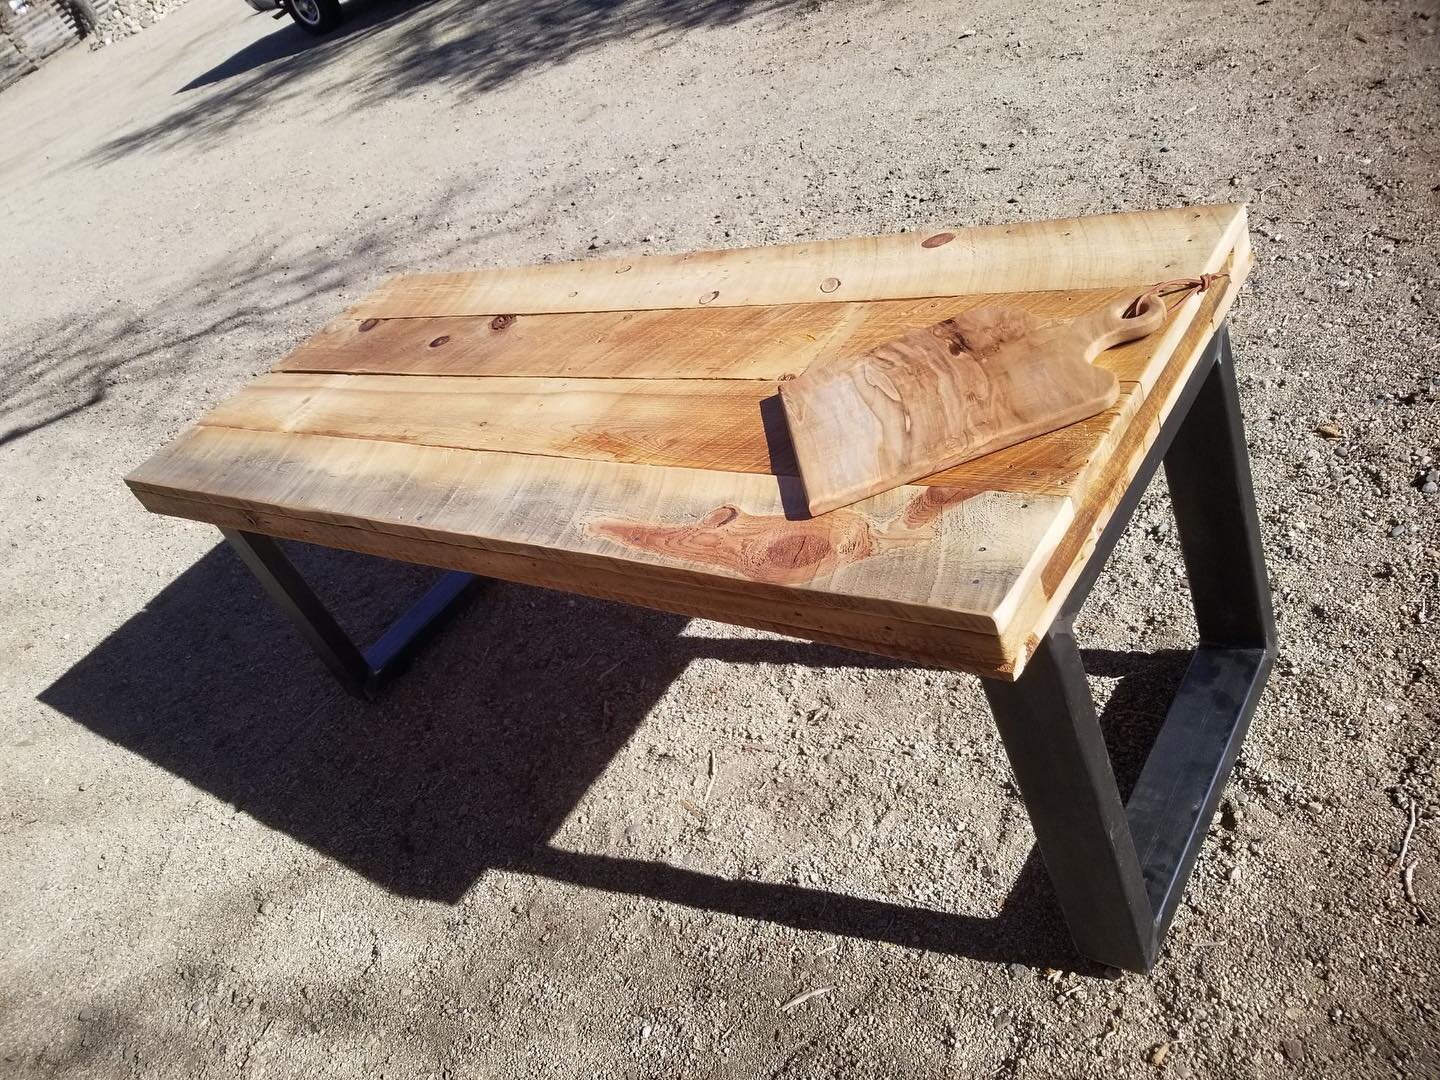 Beautiful desk made with a reclaimed wood top and metal legs. 
@rangewoodreclaimers @newmexicotrue #rangewoodremodelers  #rangewoodranch #barnwood #barnwoodfurniture #barnwooddecor #mantel #barndismantle #customfurniture #customfurnituredesign #ranch